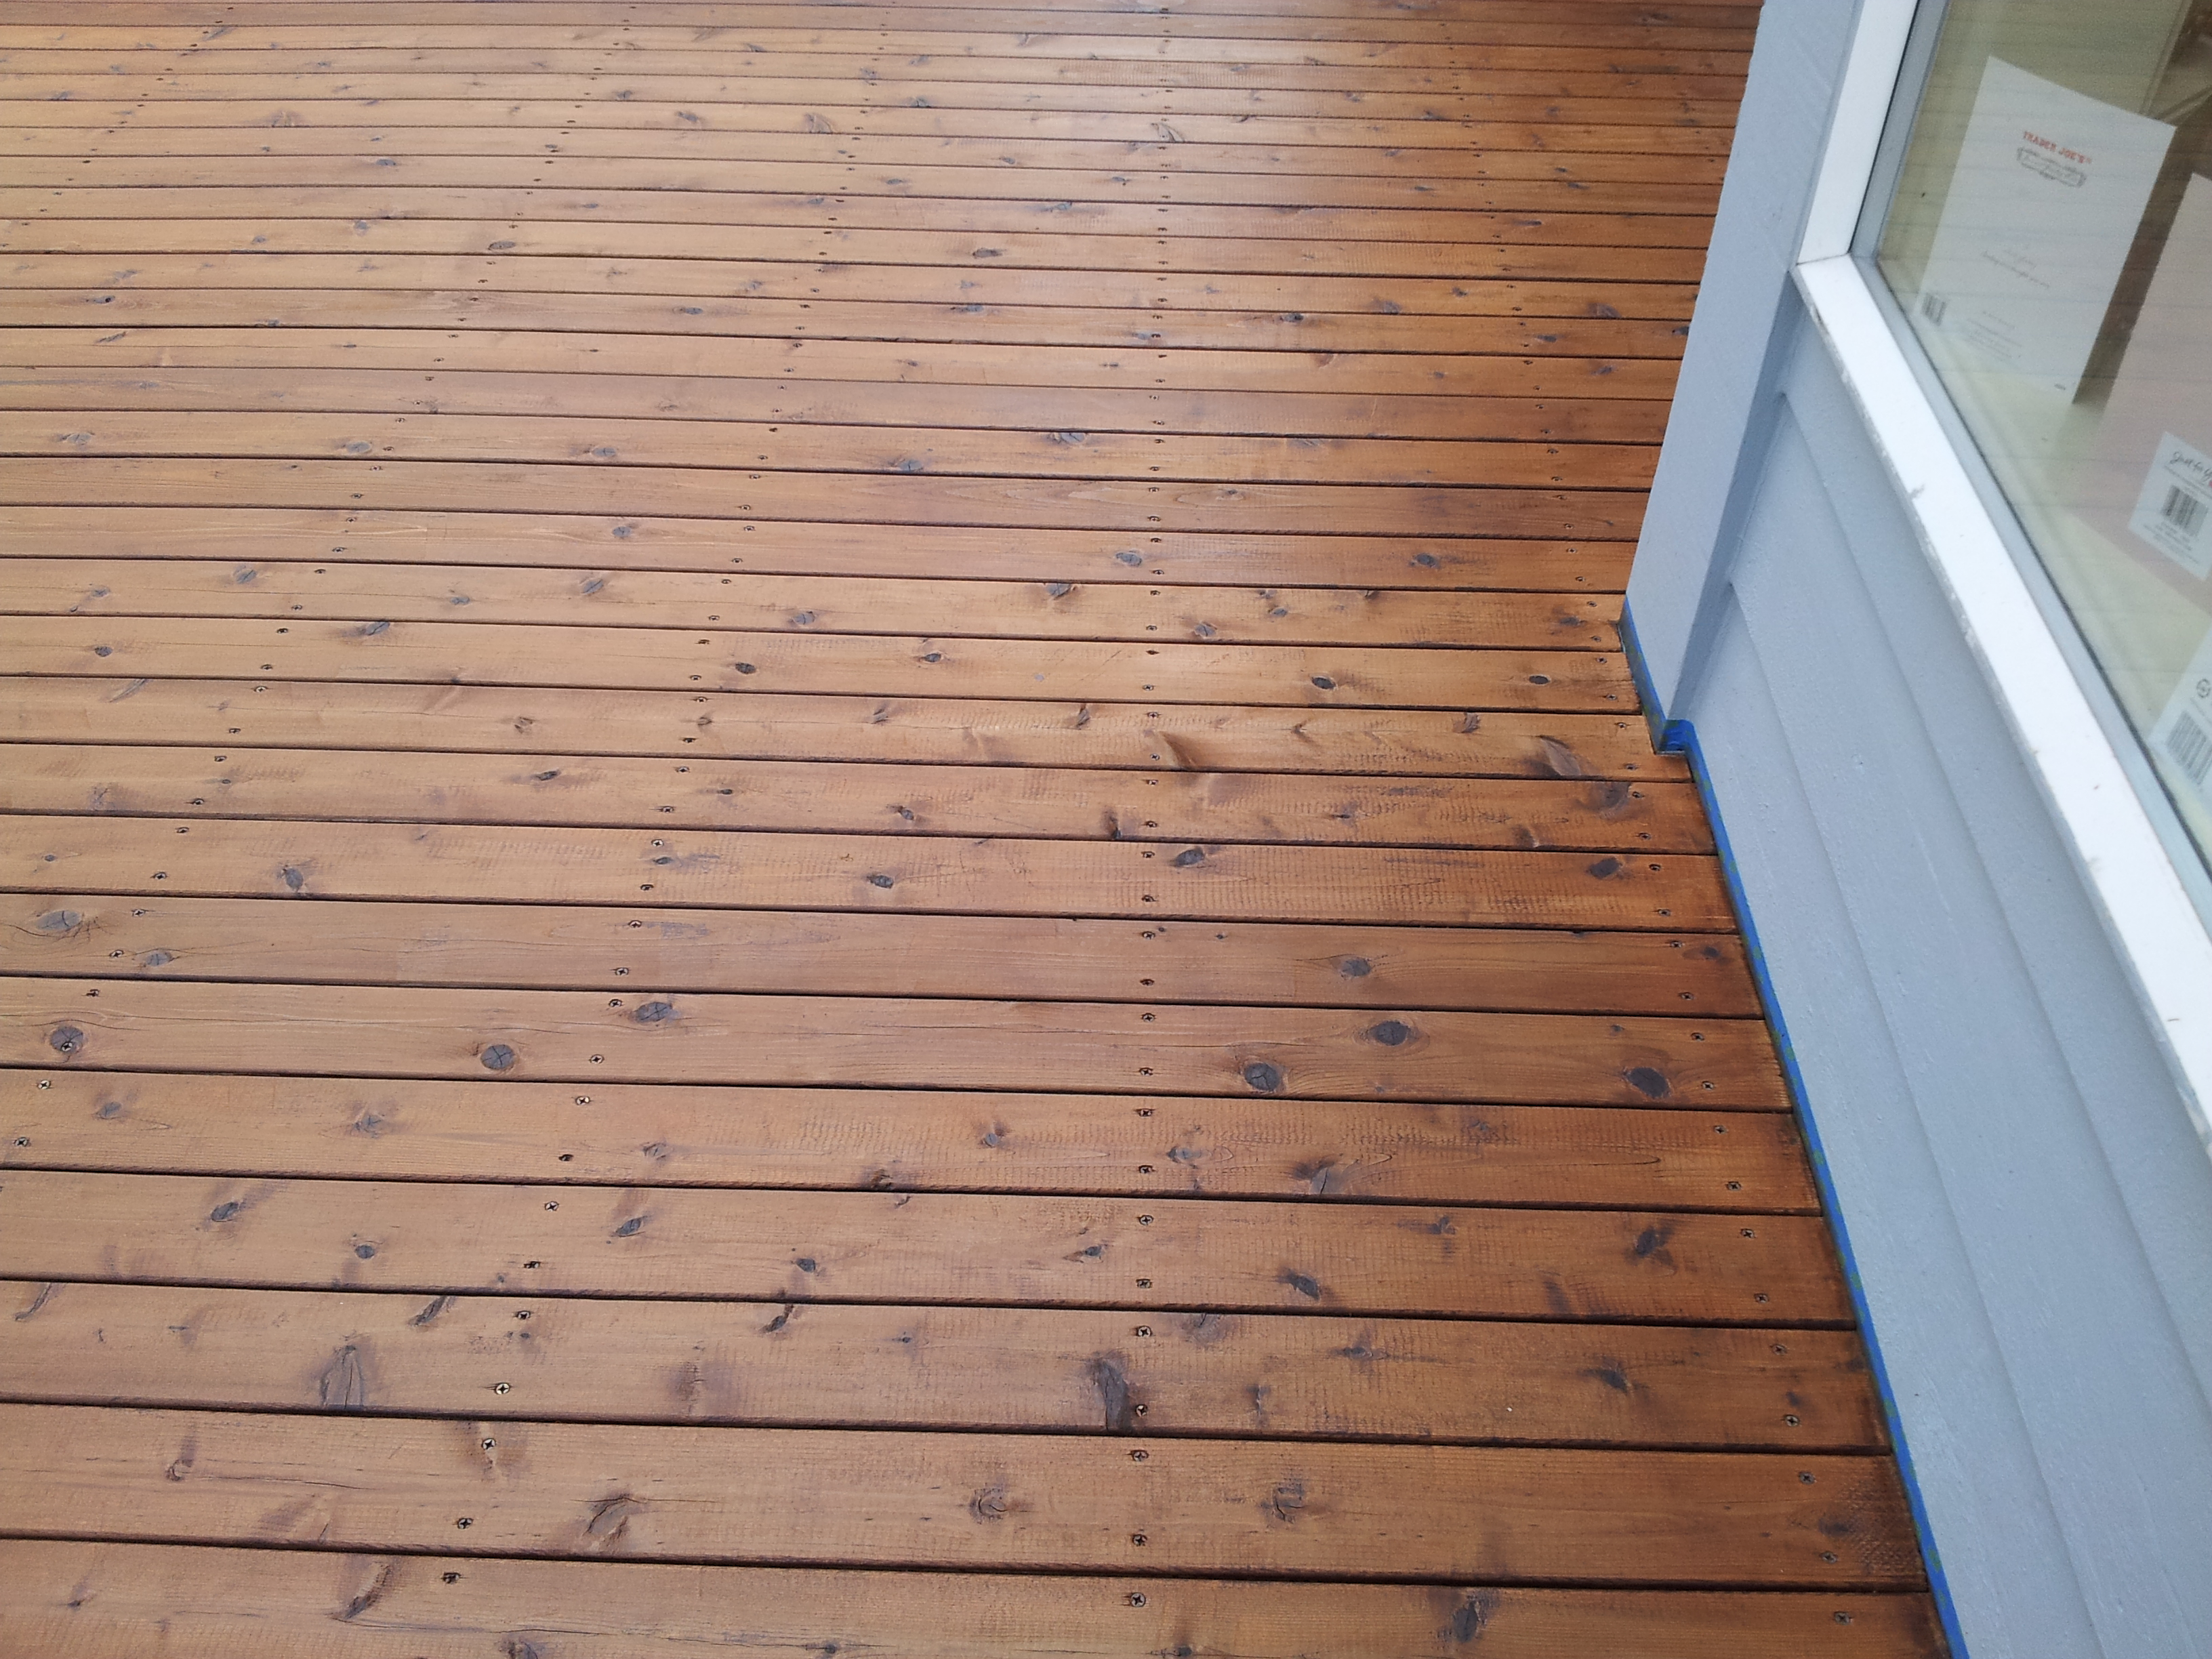 Oil Based Deck Stains 2018 Best Deck Stain Reviews Ratings within dimensions 3264 X 2448